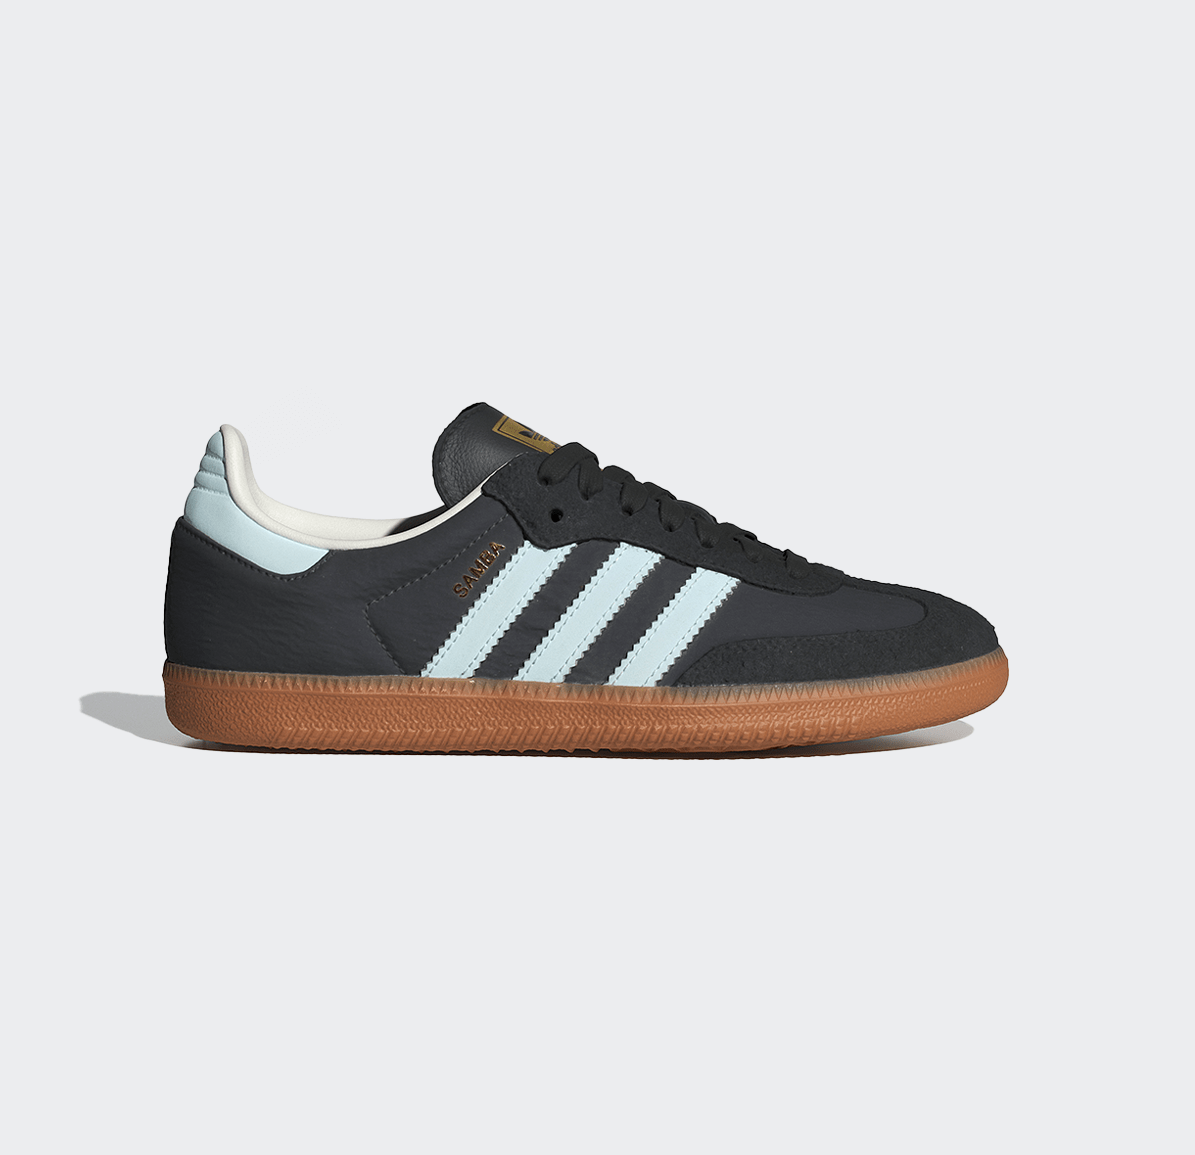 Adidas Samba OG Womens - Carbon/Almost Blue/Chalk White - Adidas - State Of Play